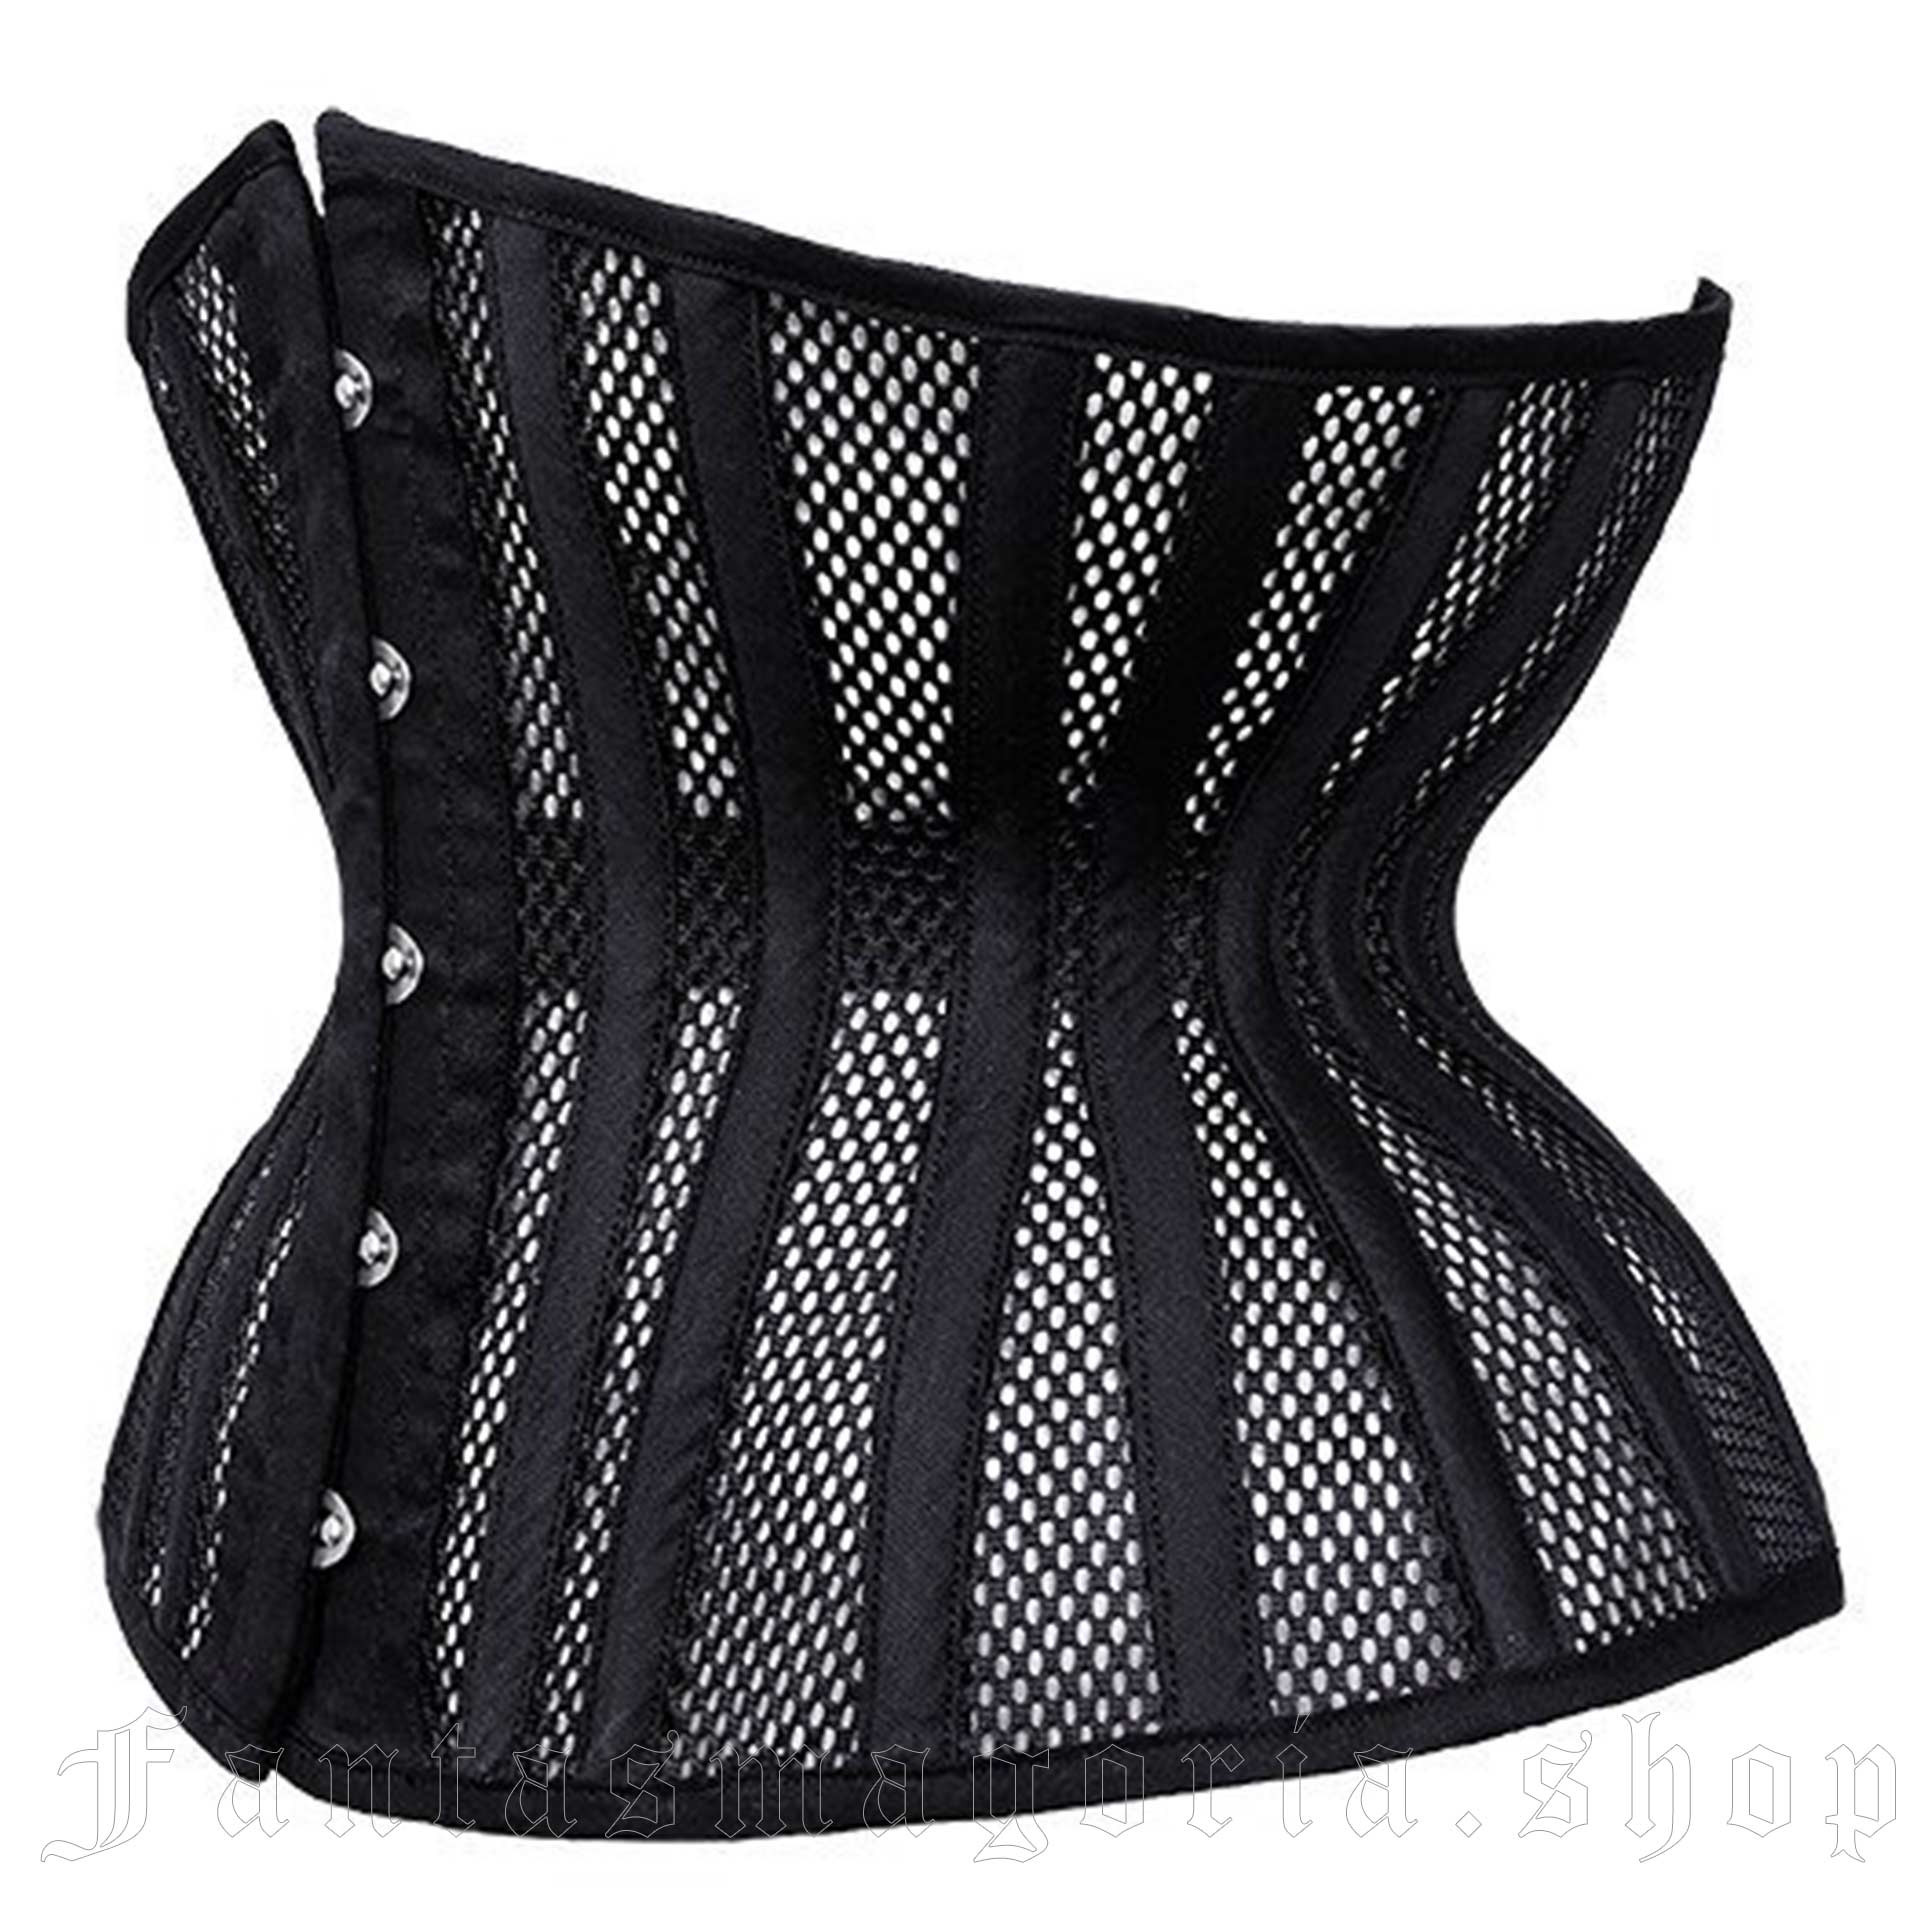 Shapely™ Hourglass Corset